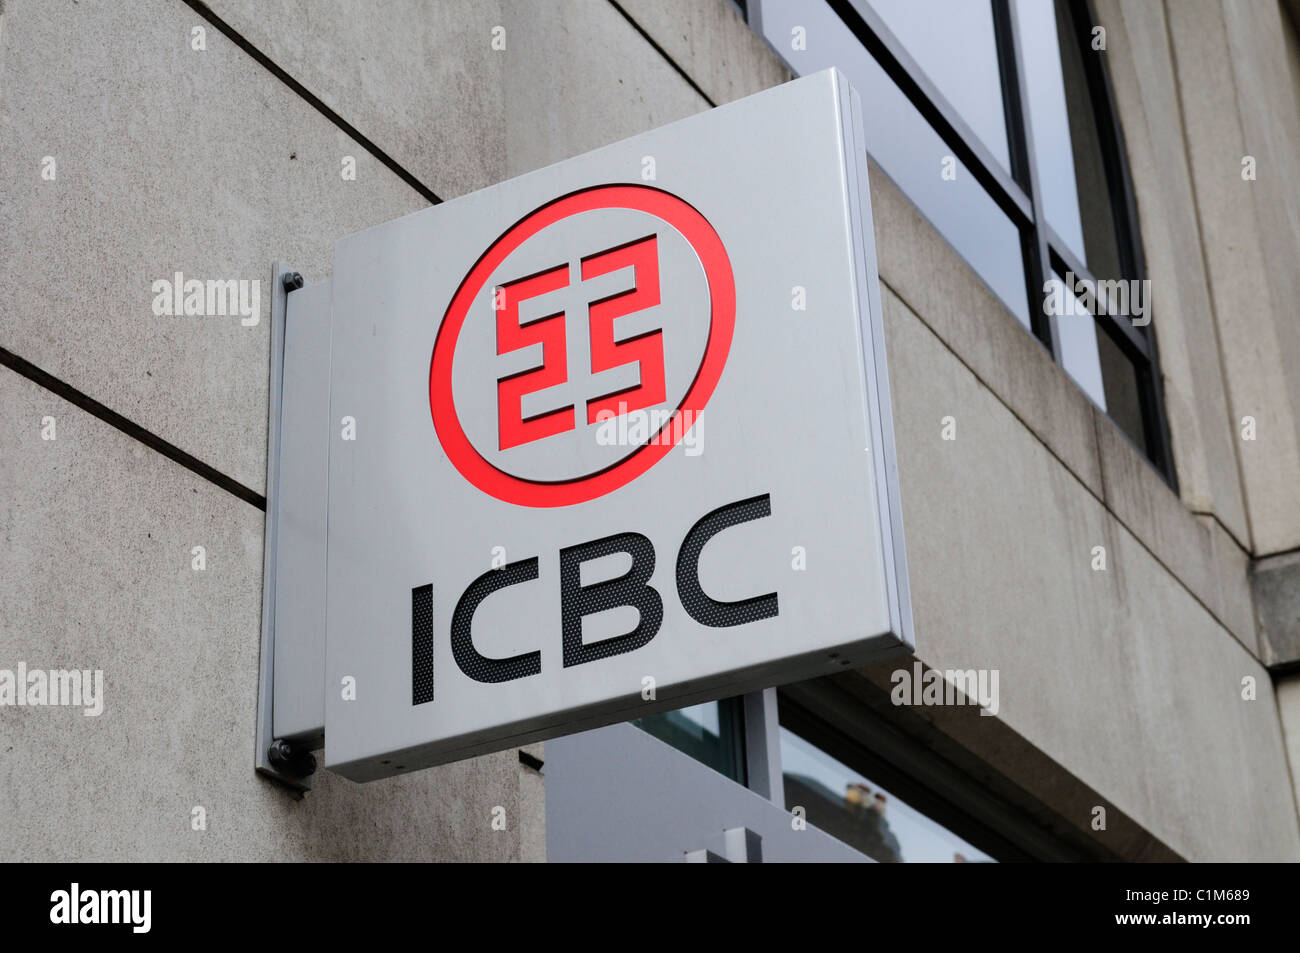 Industrial and Commercial Bank of China ICBC sign, London, England, UK Stock Photo